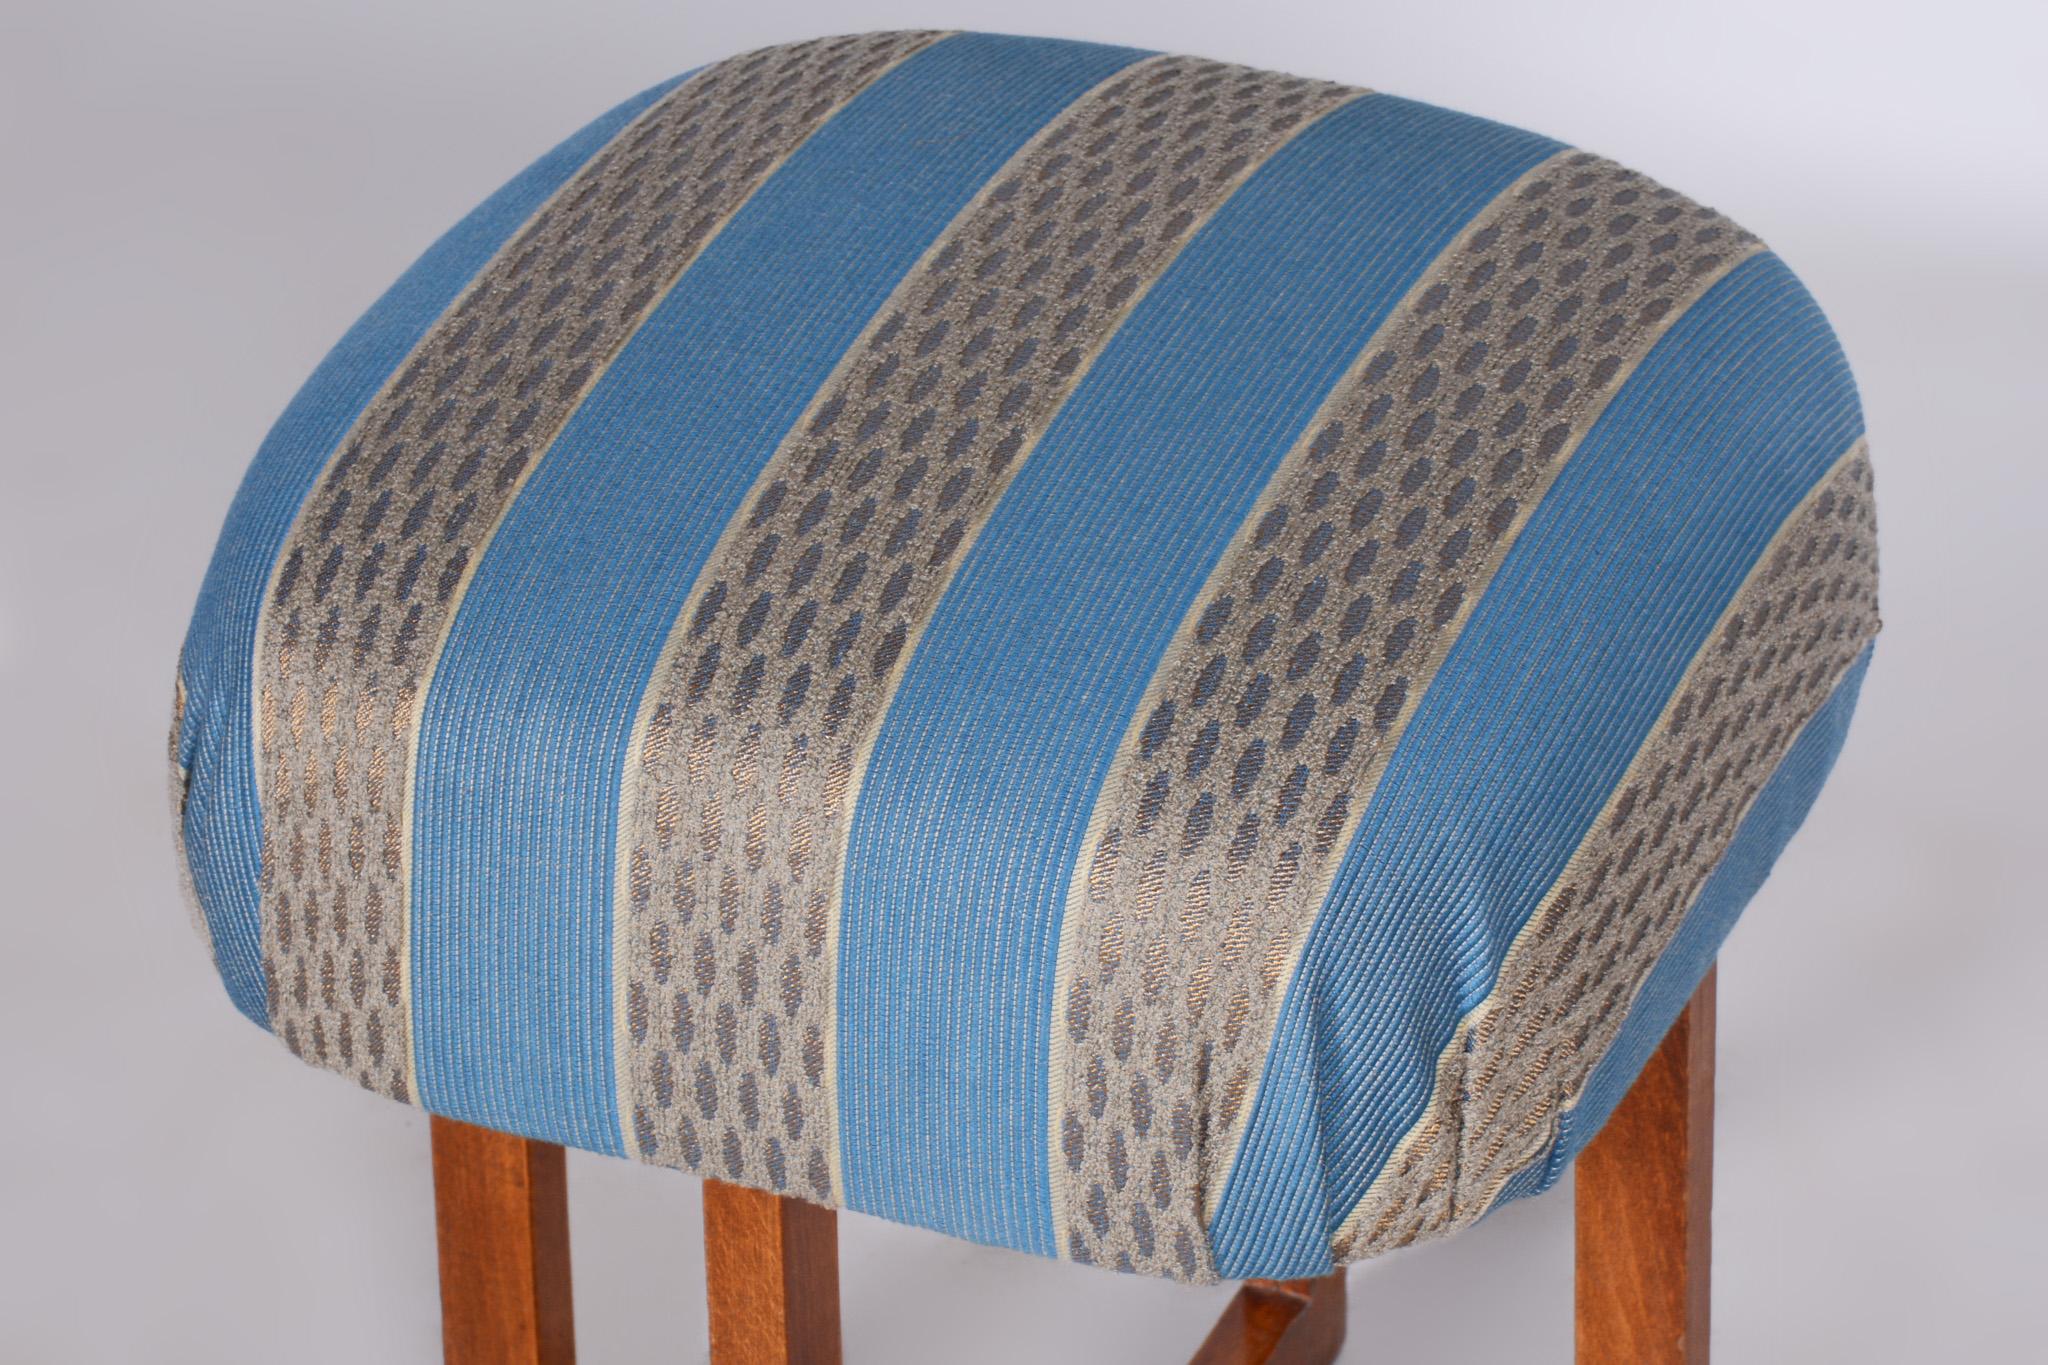 Restored Art Deco Beech Stool with New Upholstery.

Period: 1930 - 1939
Source: Czechia (Czechoslovakia)
Material: Beech, Fabric, Upholstery
New professional upholstery.
Revived polish.

According to the original process, our professional